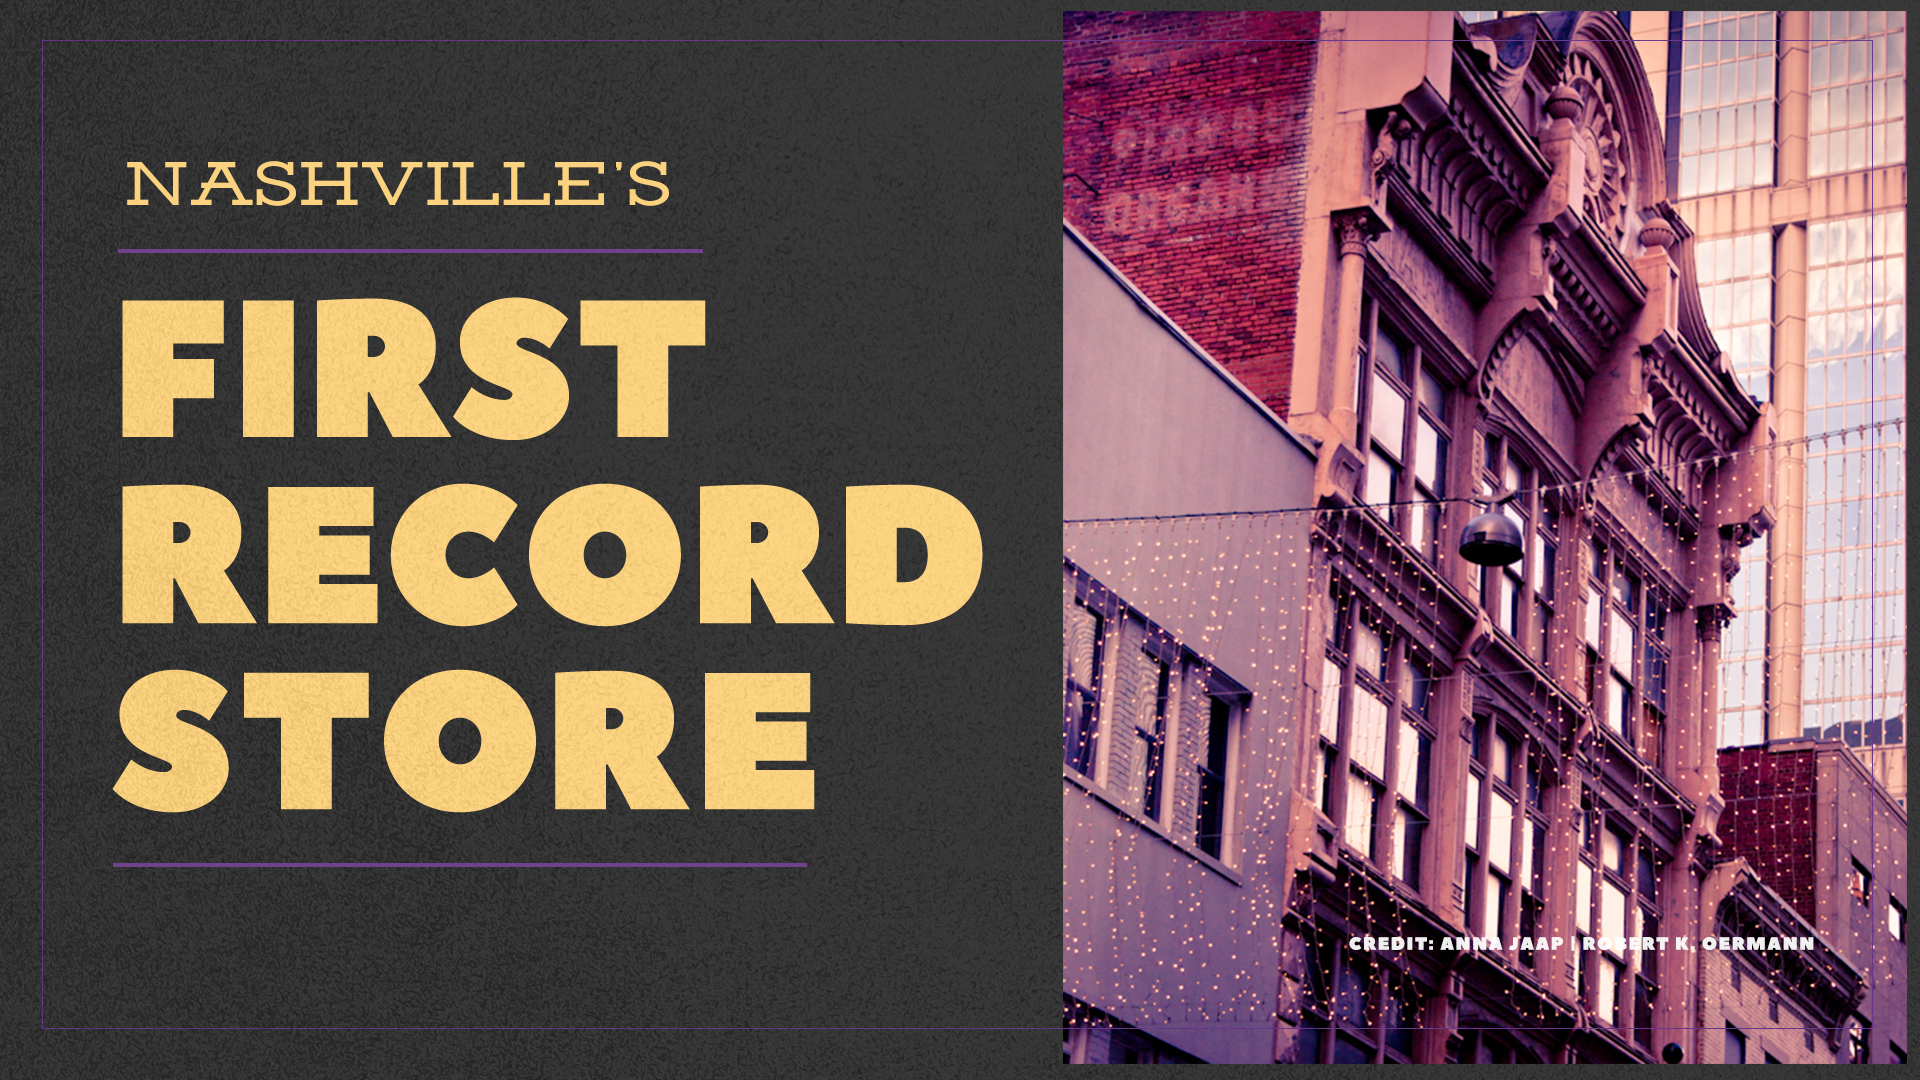 Nashville's first record store